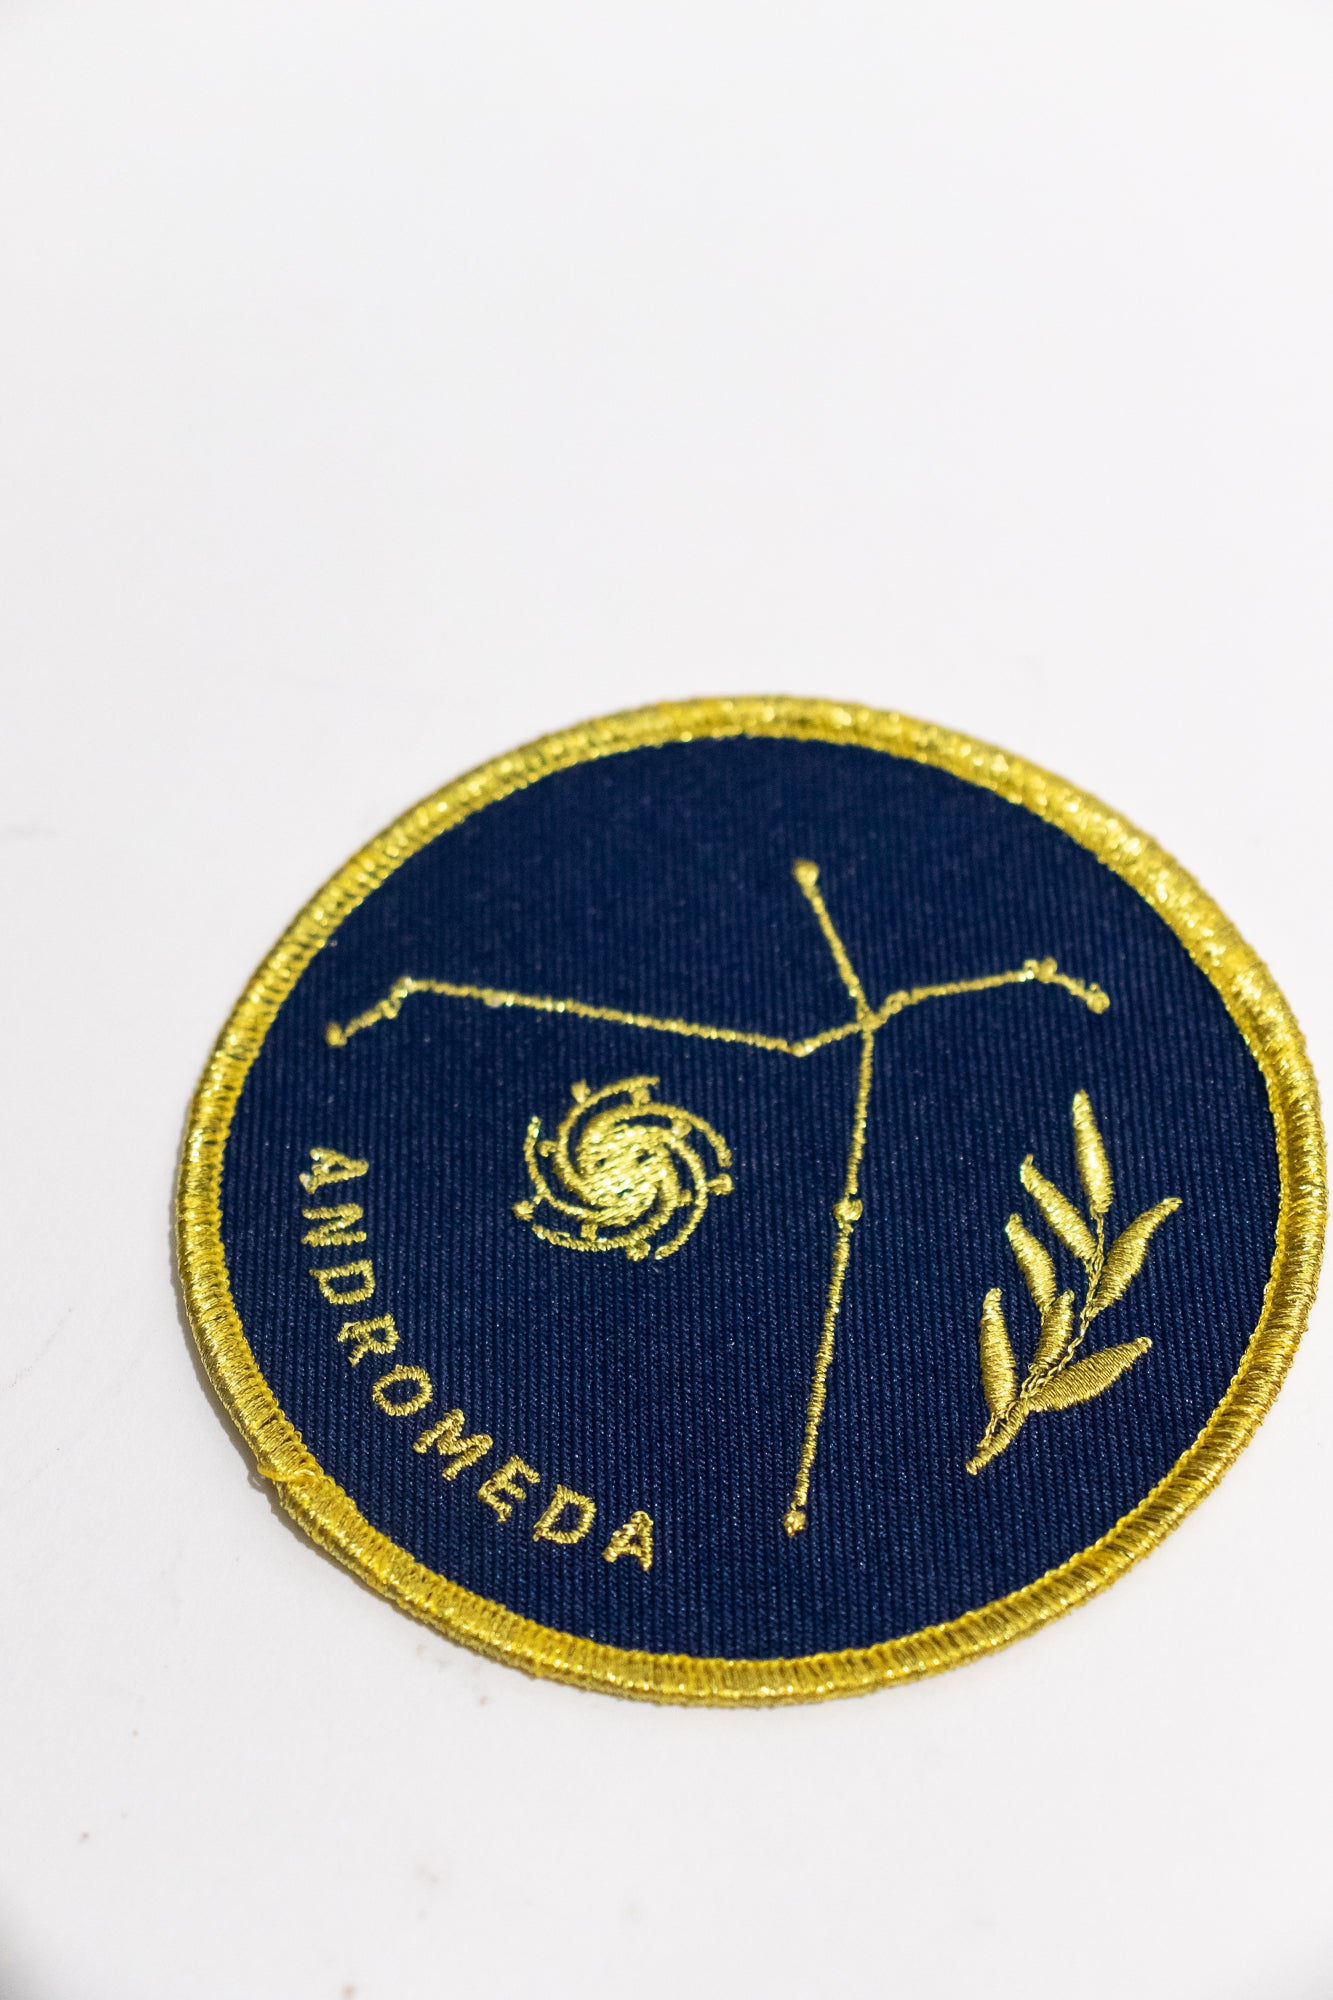 Andromeda Patch - Stemcell Science Shop